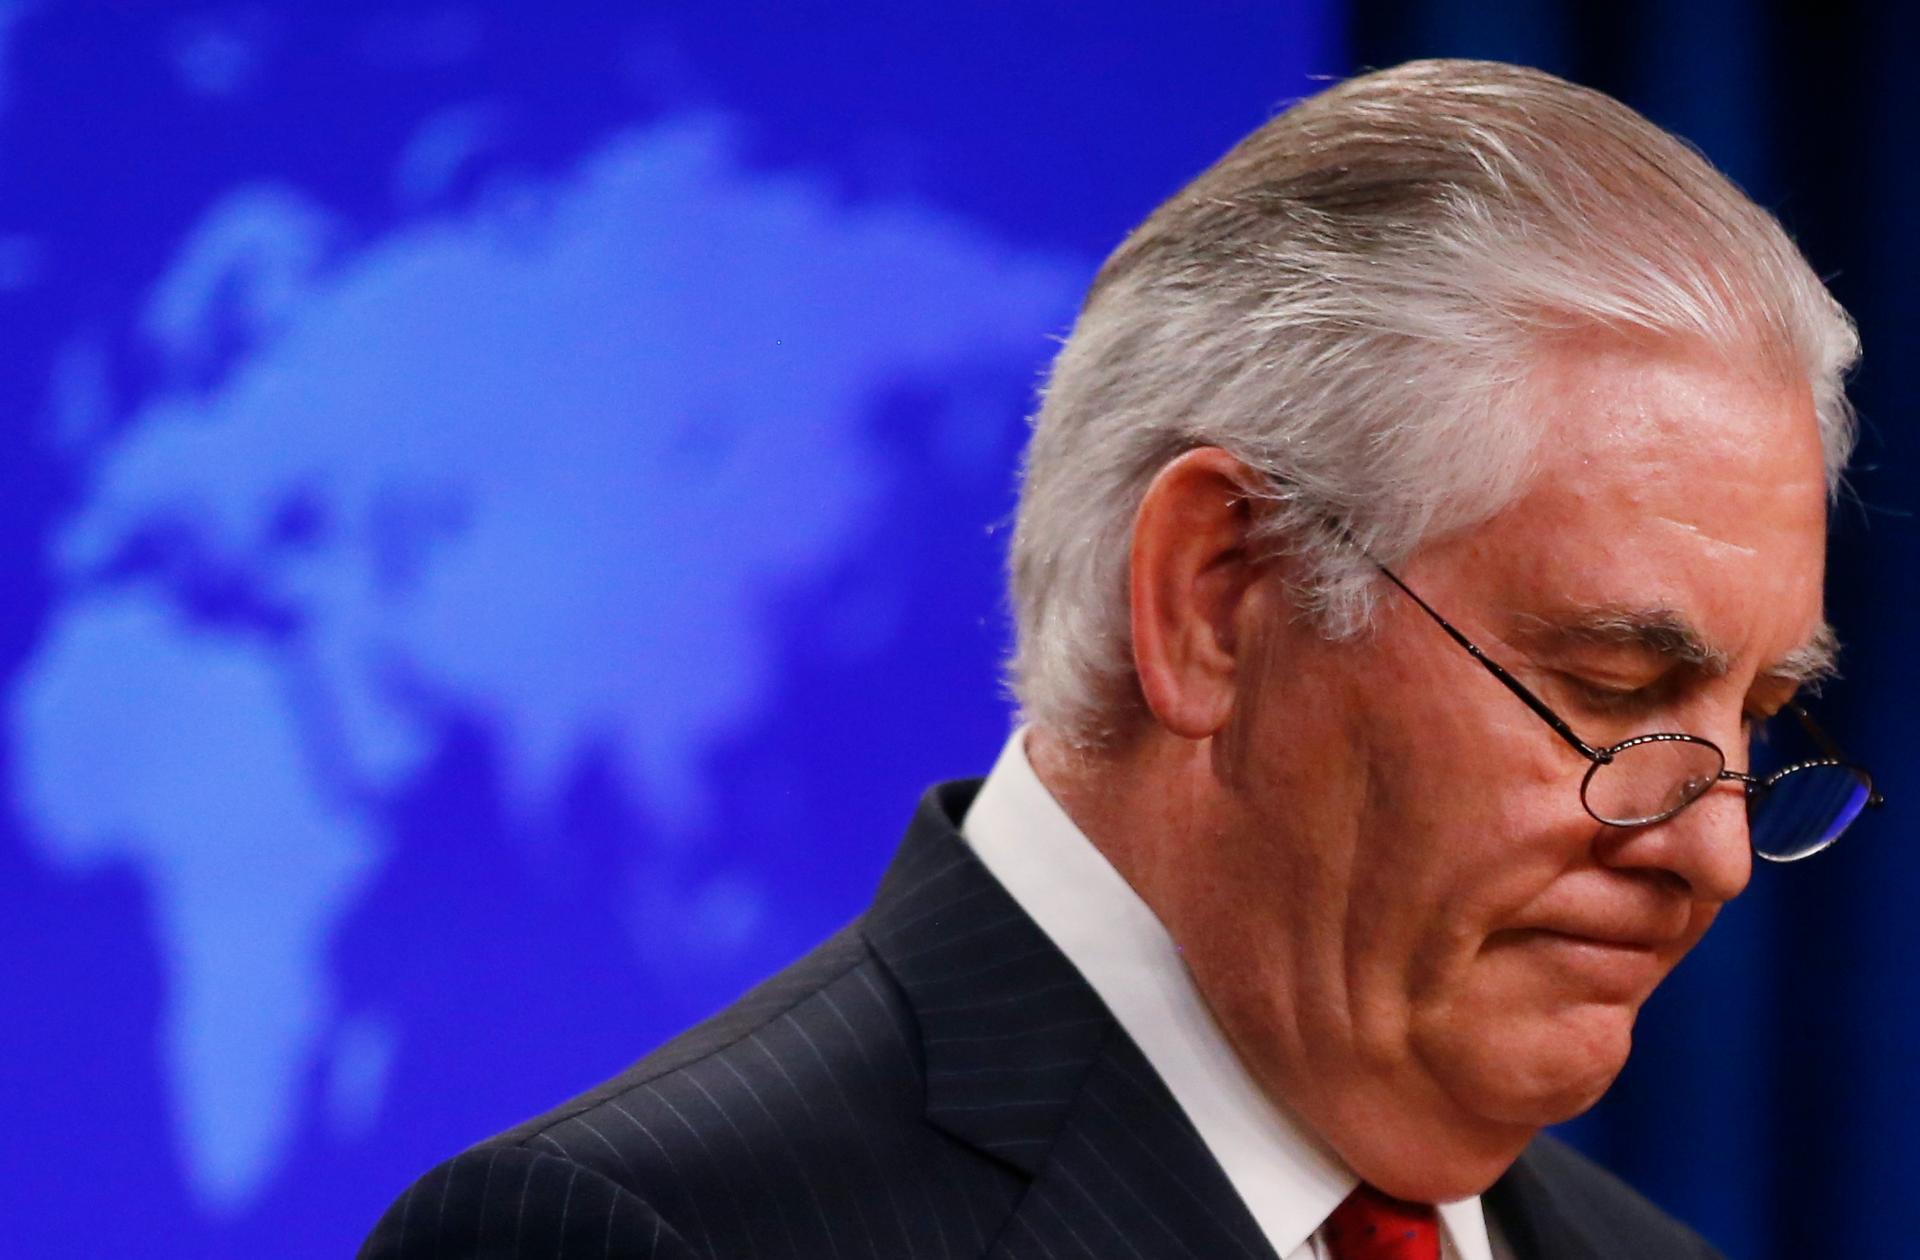 US Secretary of State Rex Tillerson speaks to the media at the US State Department after being fired by President Donald Trump